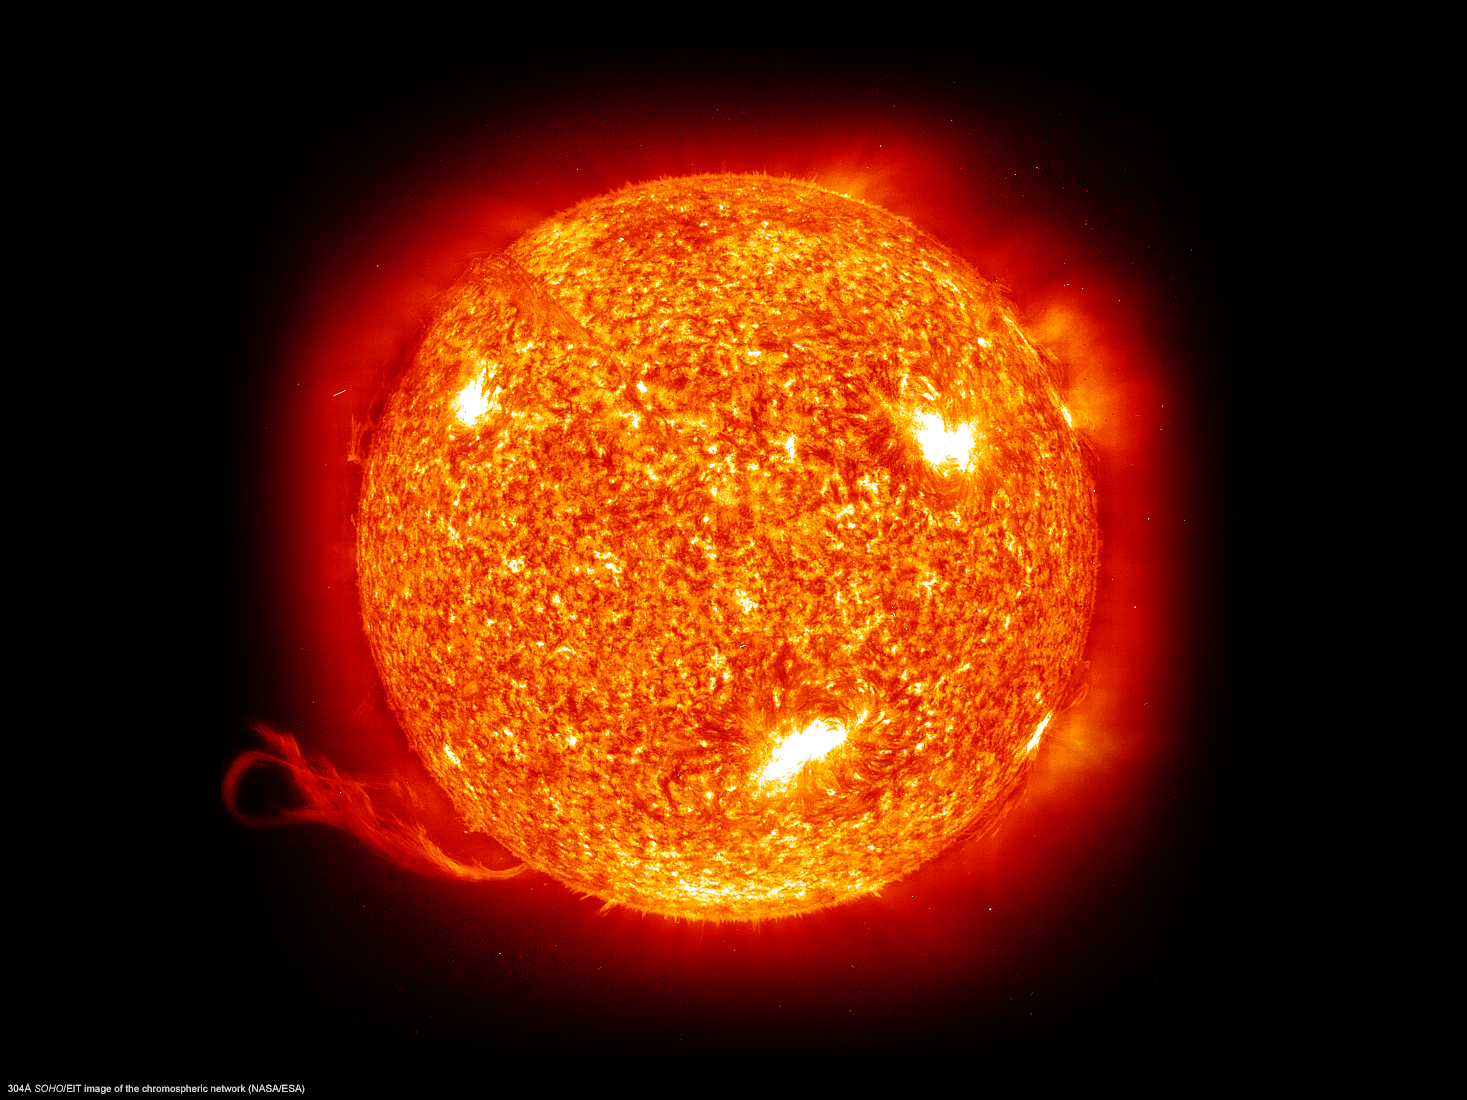 304a Soho/eit Image Of The Solar Disk - Sun Forms - HD Wallpaper 